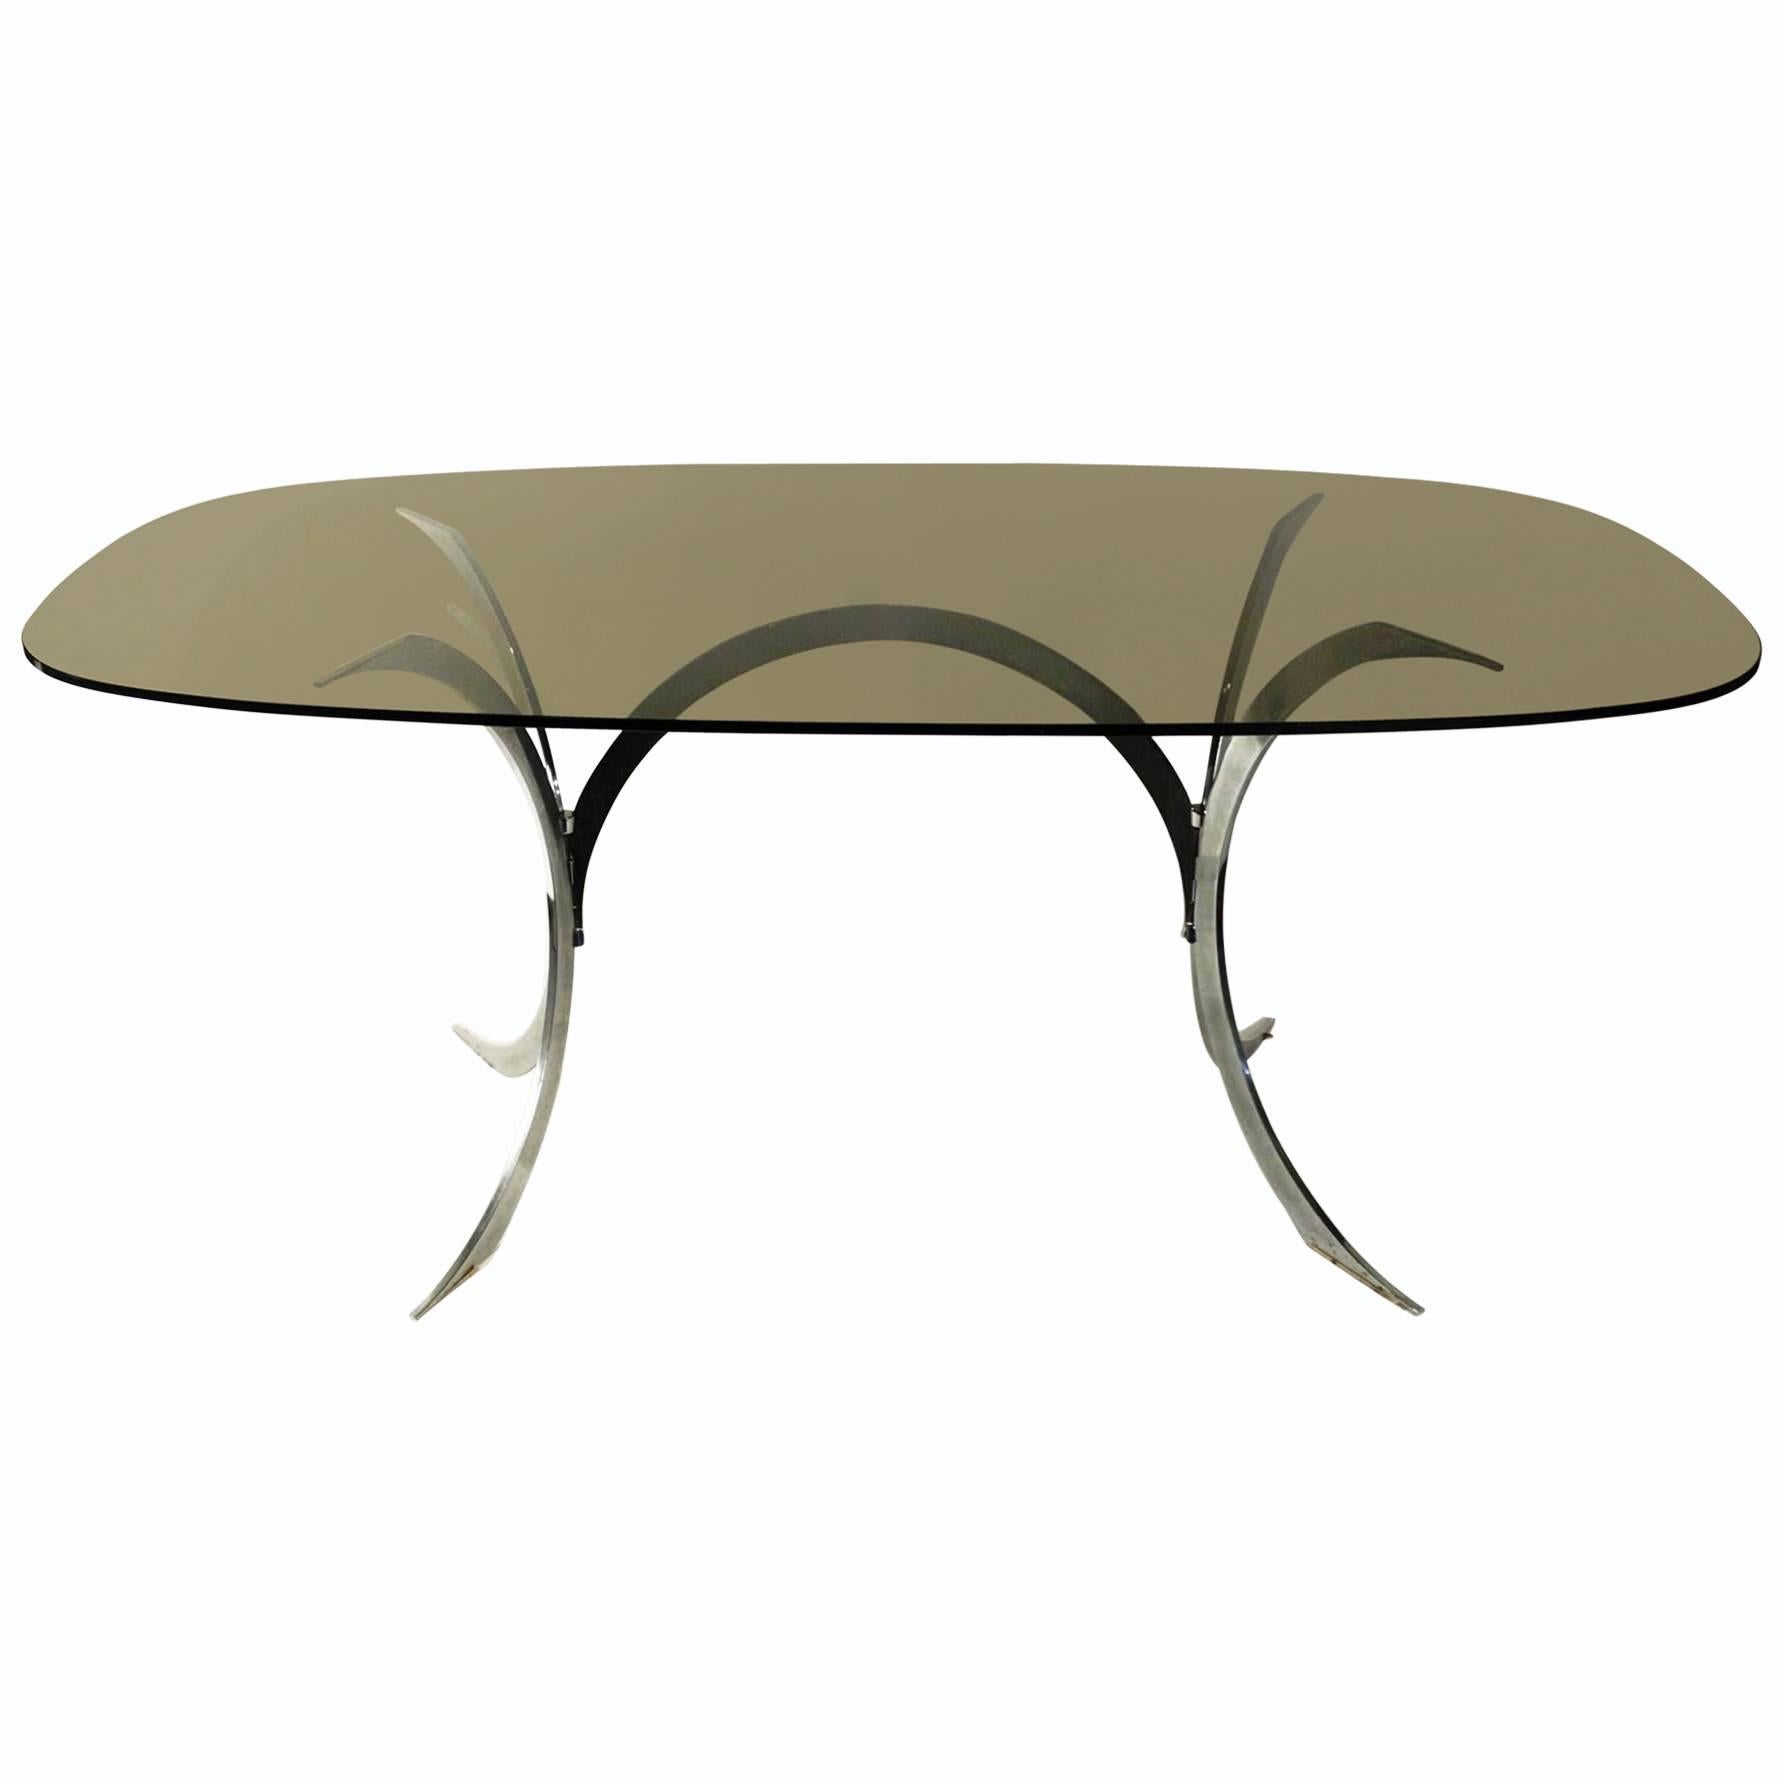 1970s Oval Dining Room Table, Chrome Base, Smoked Glass Top, French